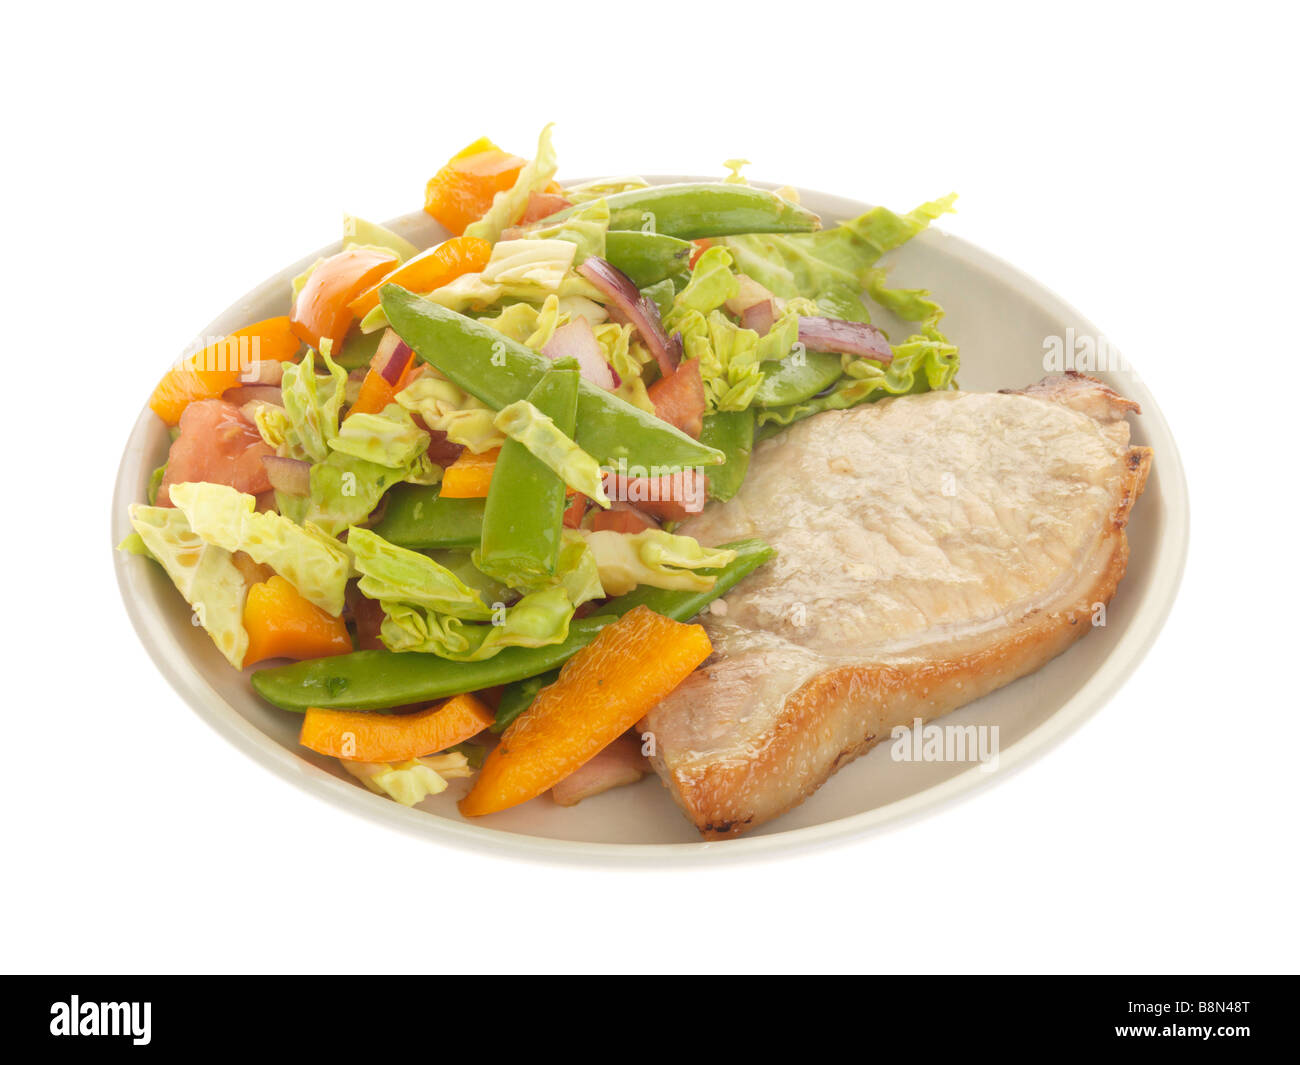 Freshly Grilled Lean Pork Loin Steak With A Fresh Healthy Summer Salad Isolated Against A White Background With No People And A Clipping Path Stock Photo